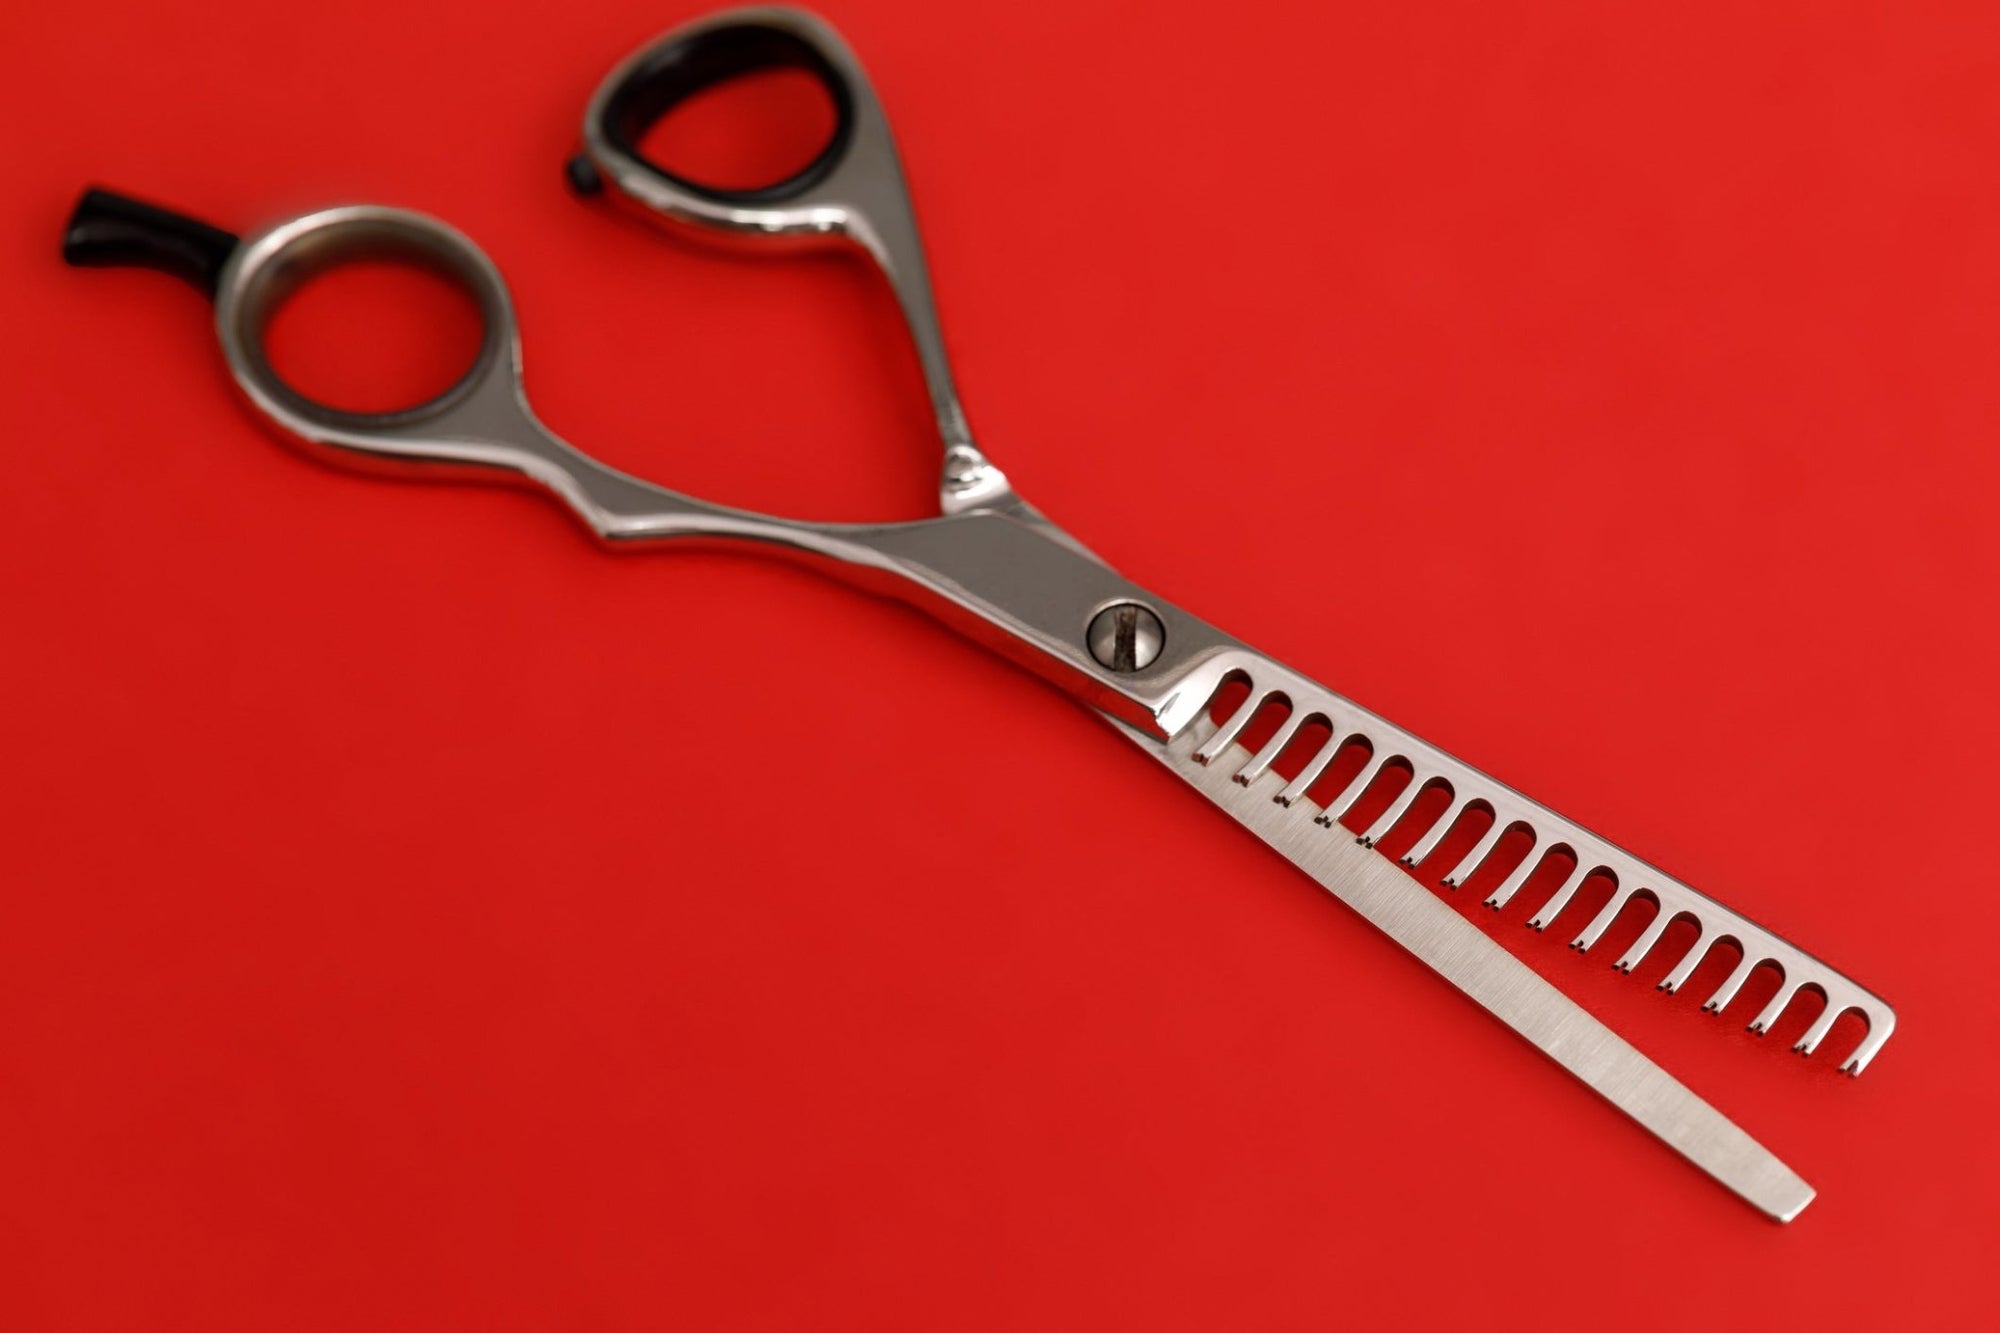 How Many Teeth Should a Thinning Scissor Have? Best Thinning Teeth - Scissor Hub Australia